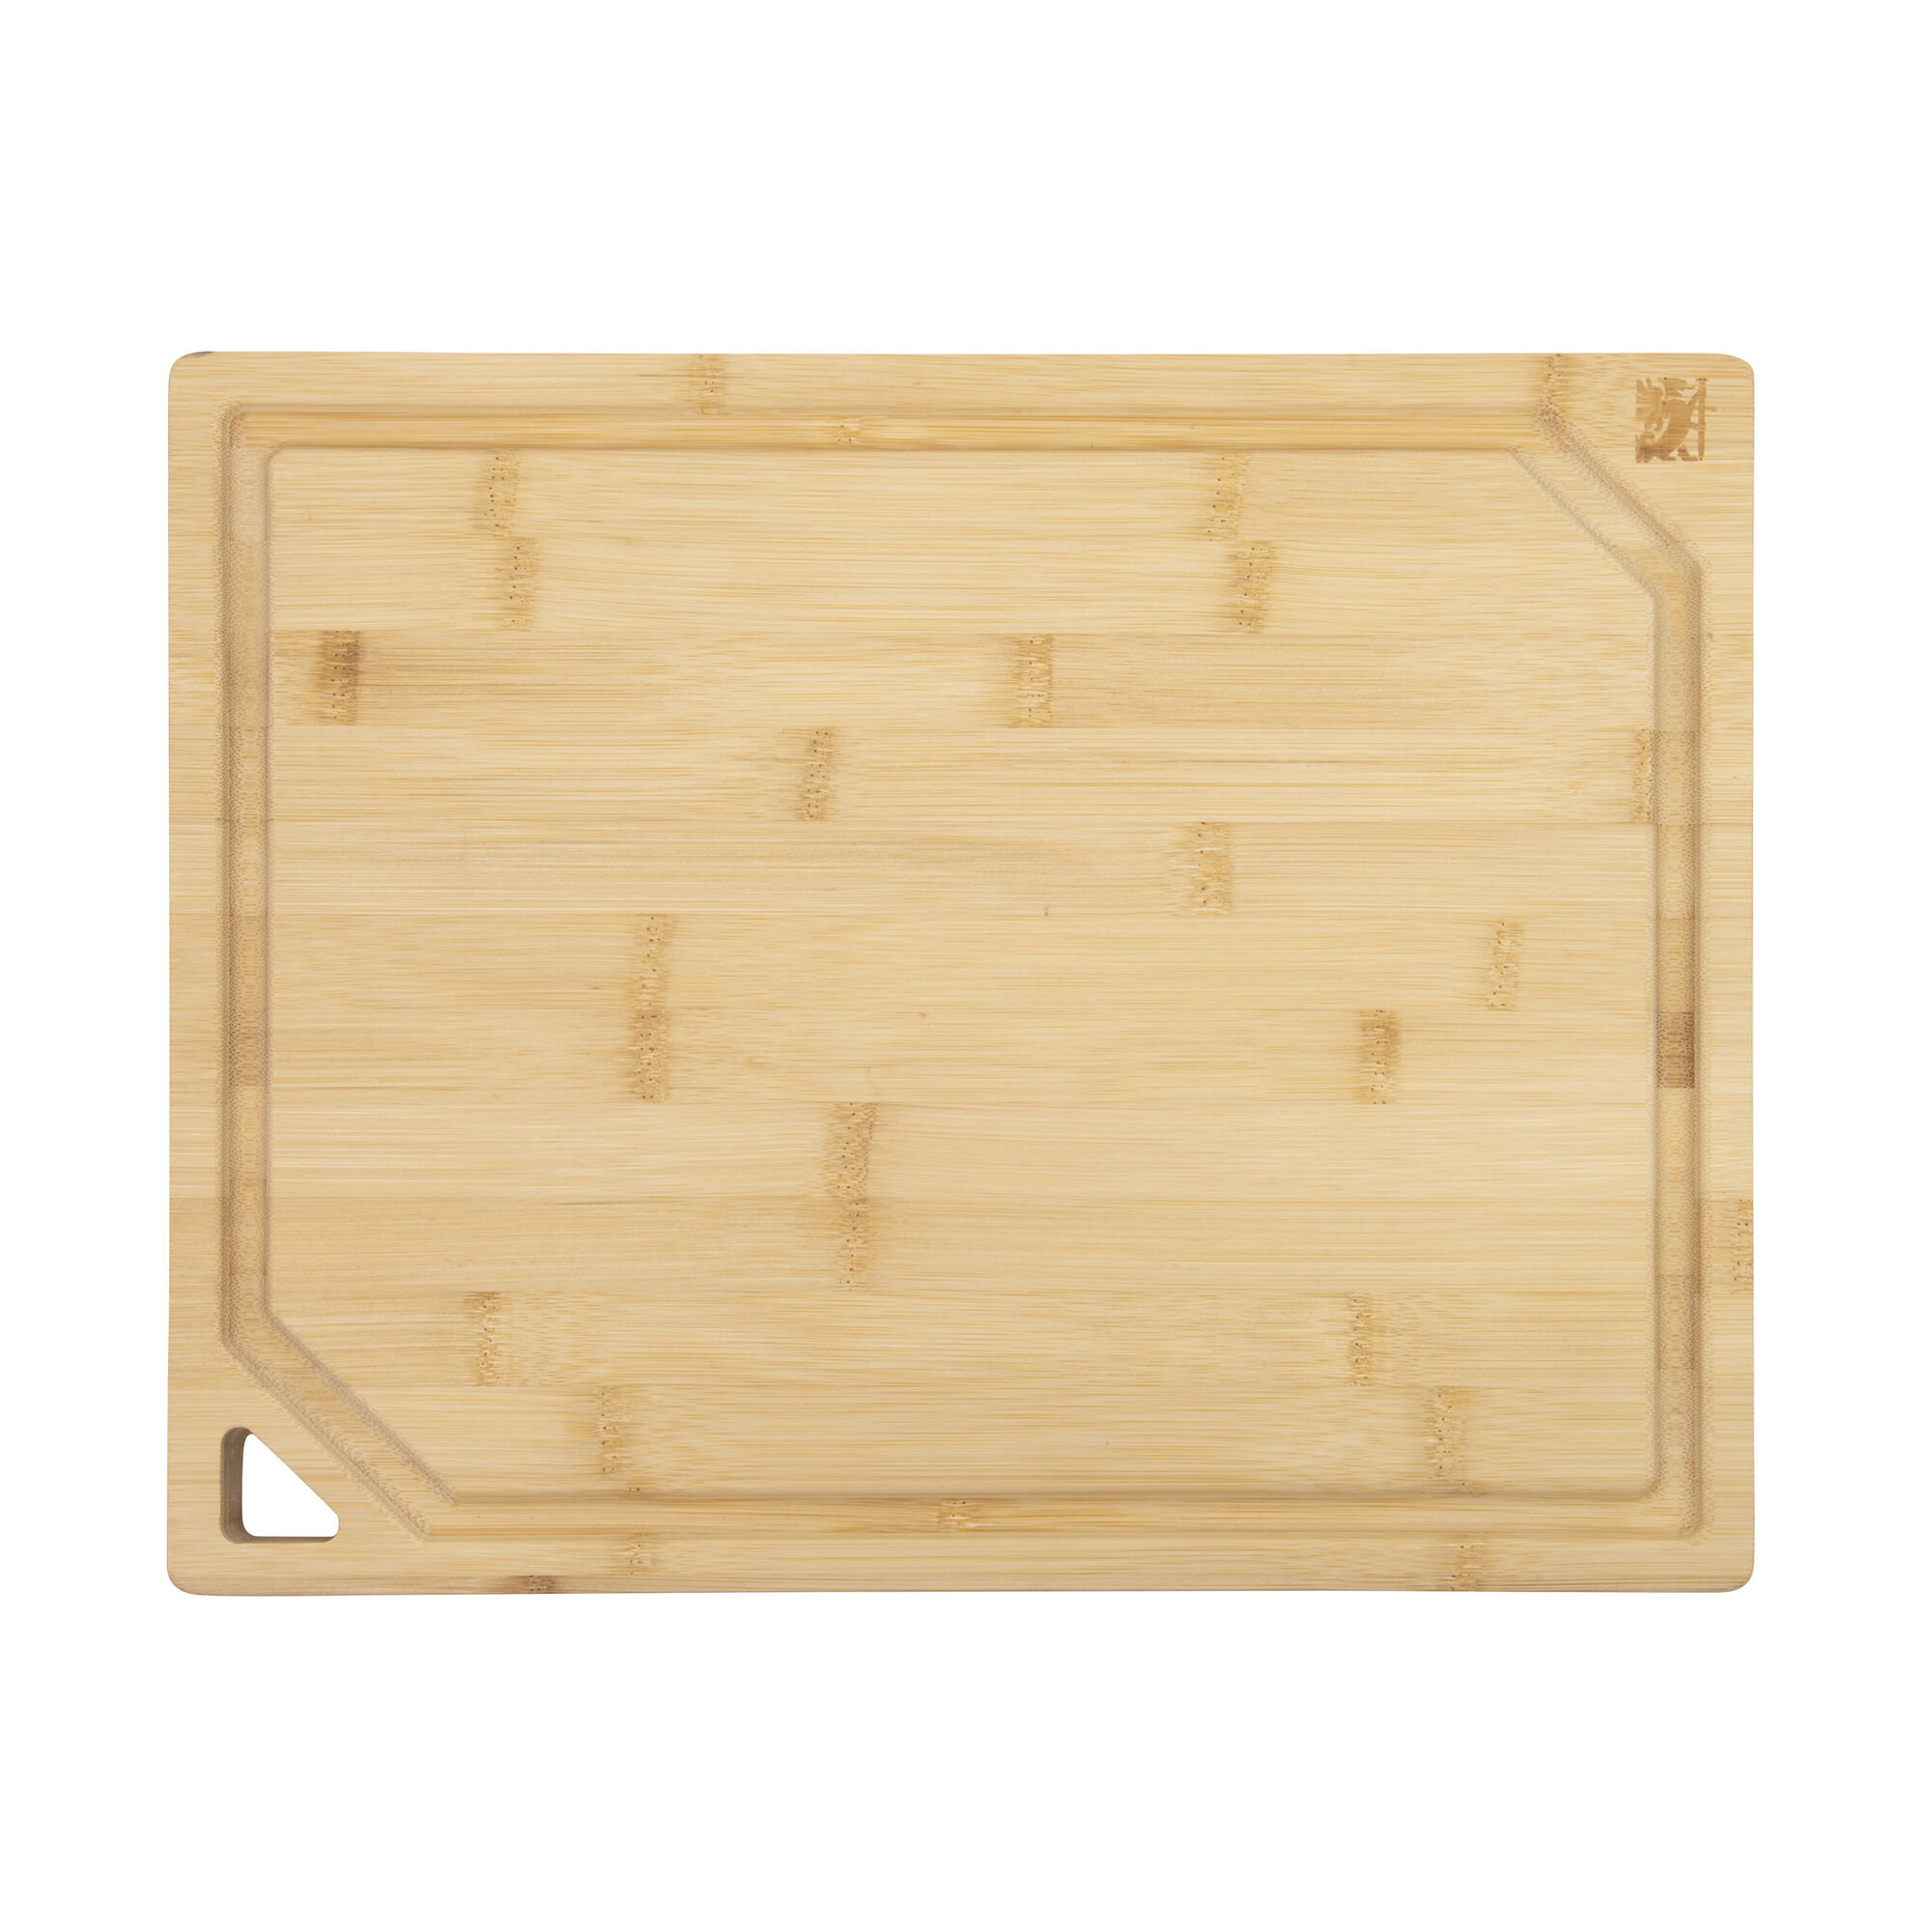 Bamboo Bread Slicer Wooden Cutting Board with Adjustable Slicing